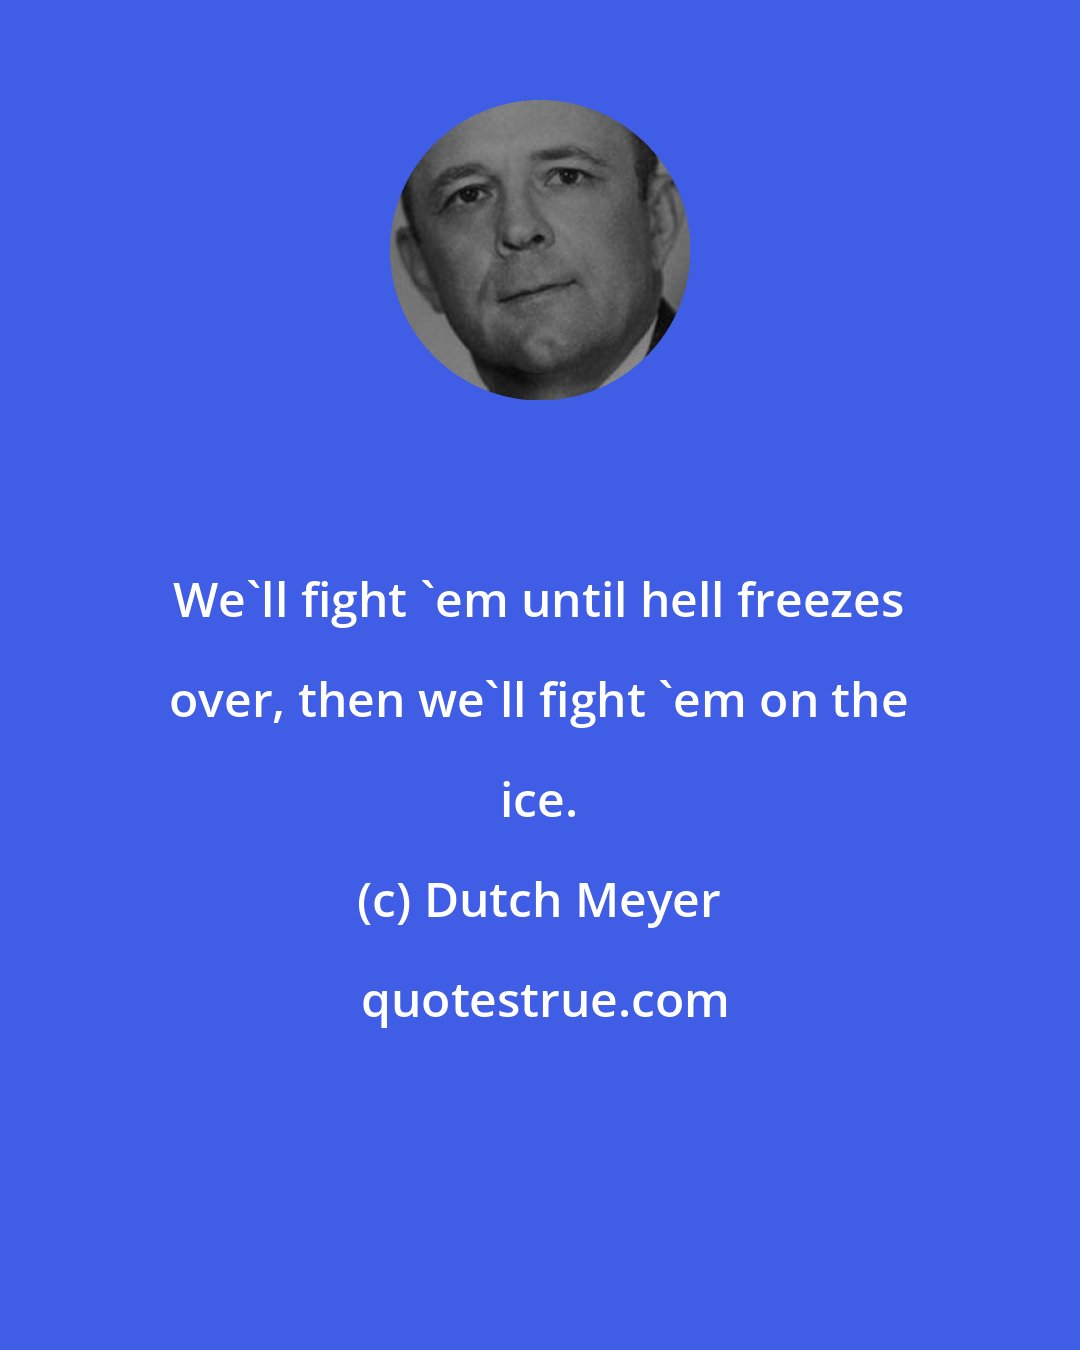 Dutch Meyer: We'll fight 'em until hell freezes over, then we'll fight 'em on the ice.